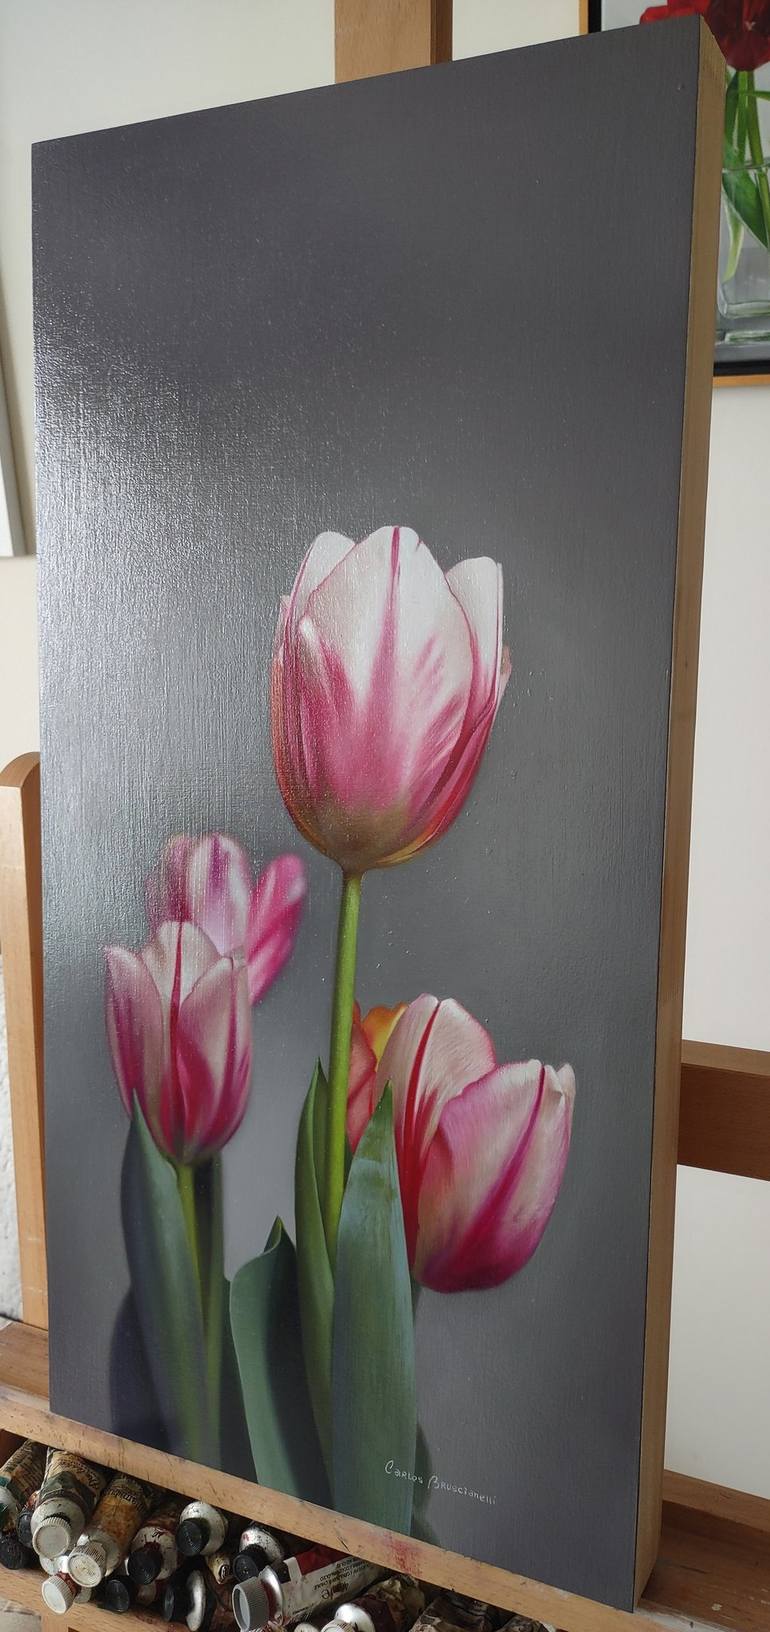 Original Fine Art Floral Painting by Carlos Bruscianelli